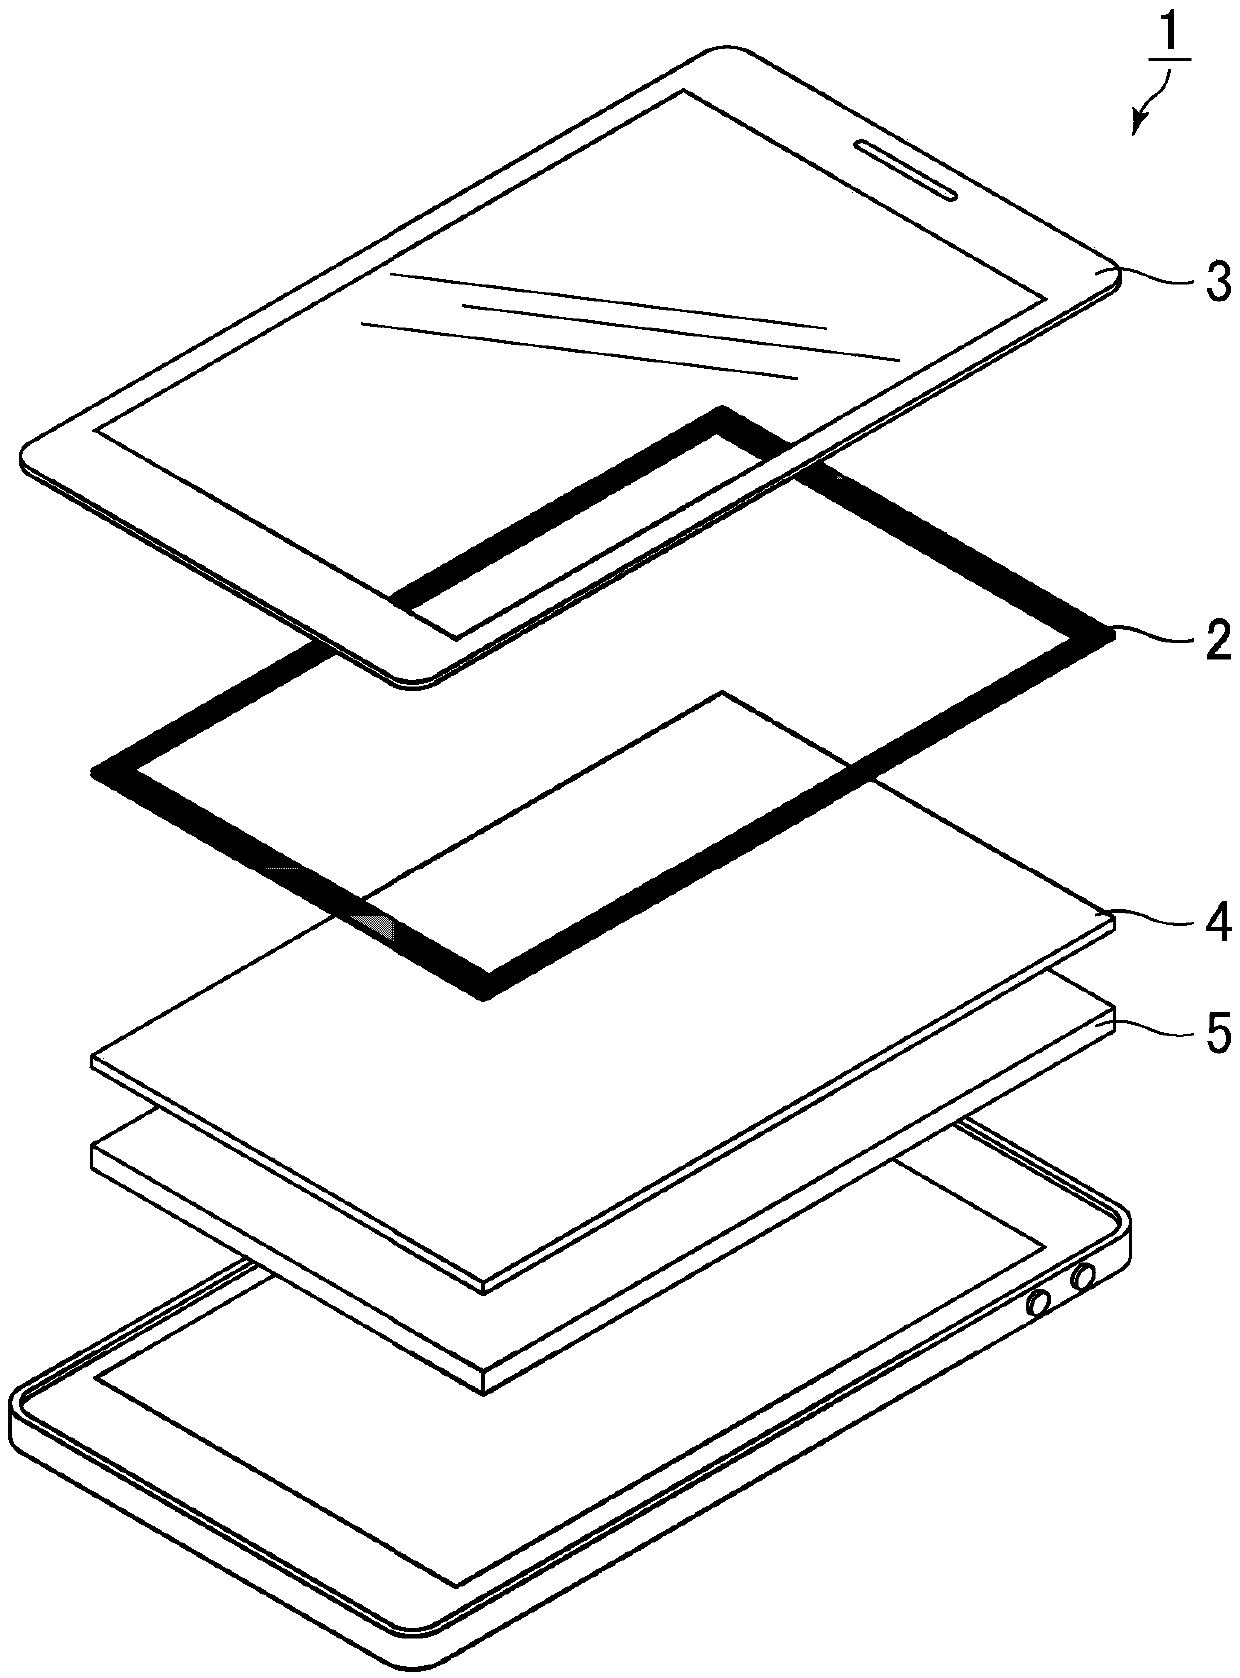 Adhesive sheet for electronic devices